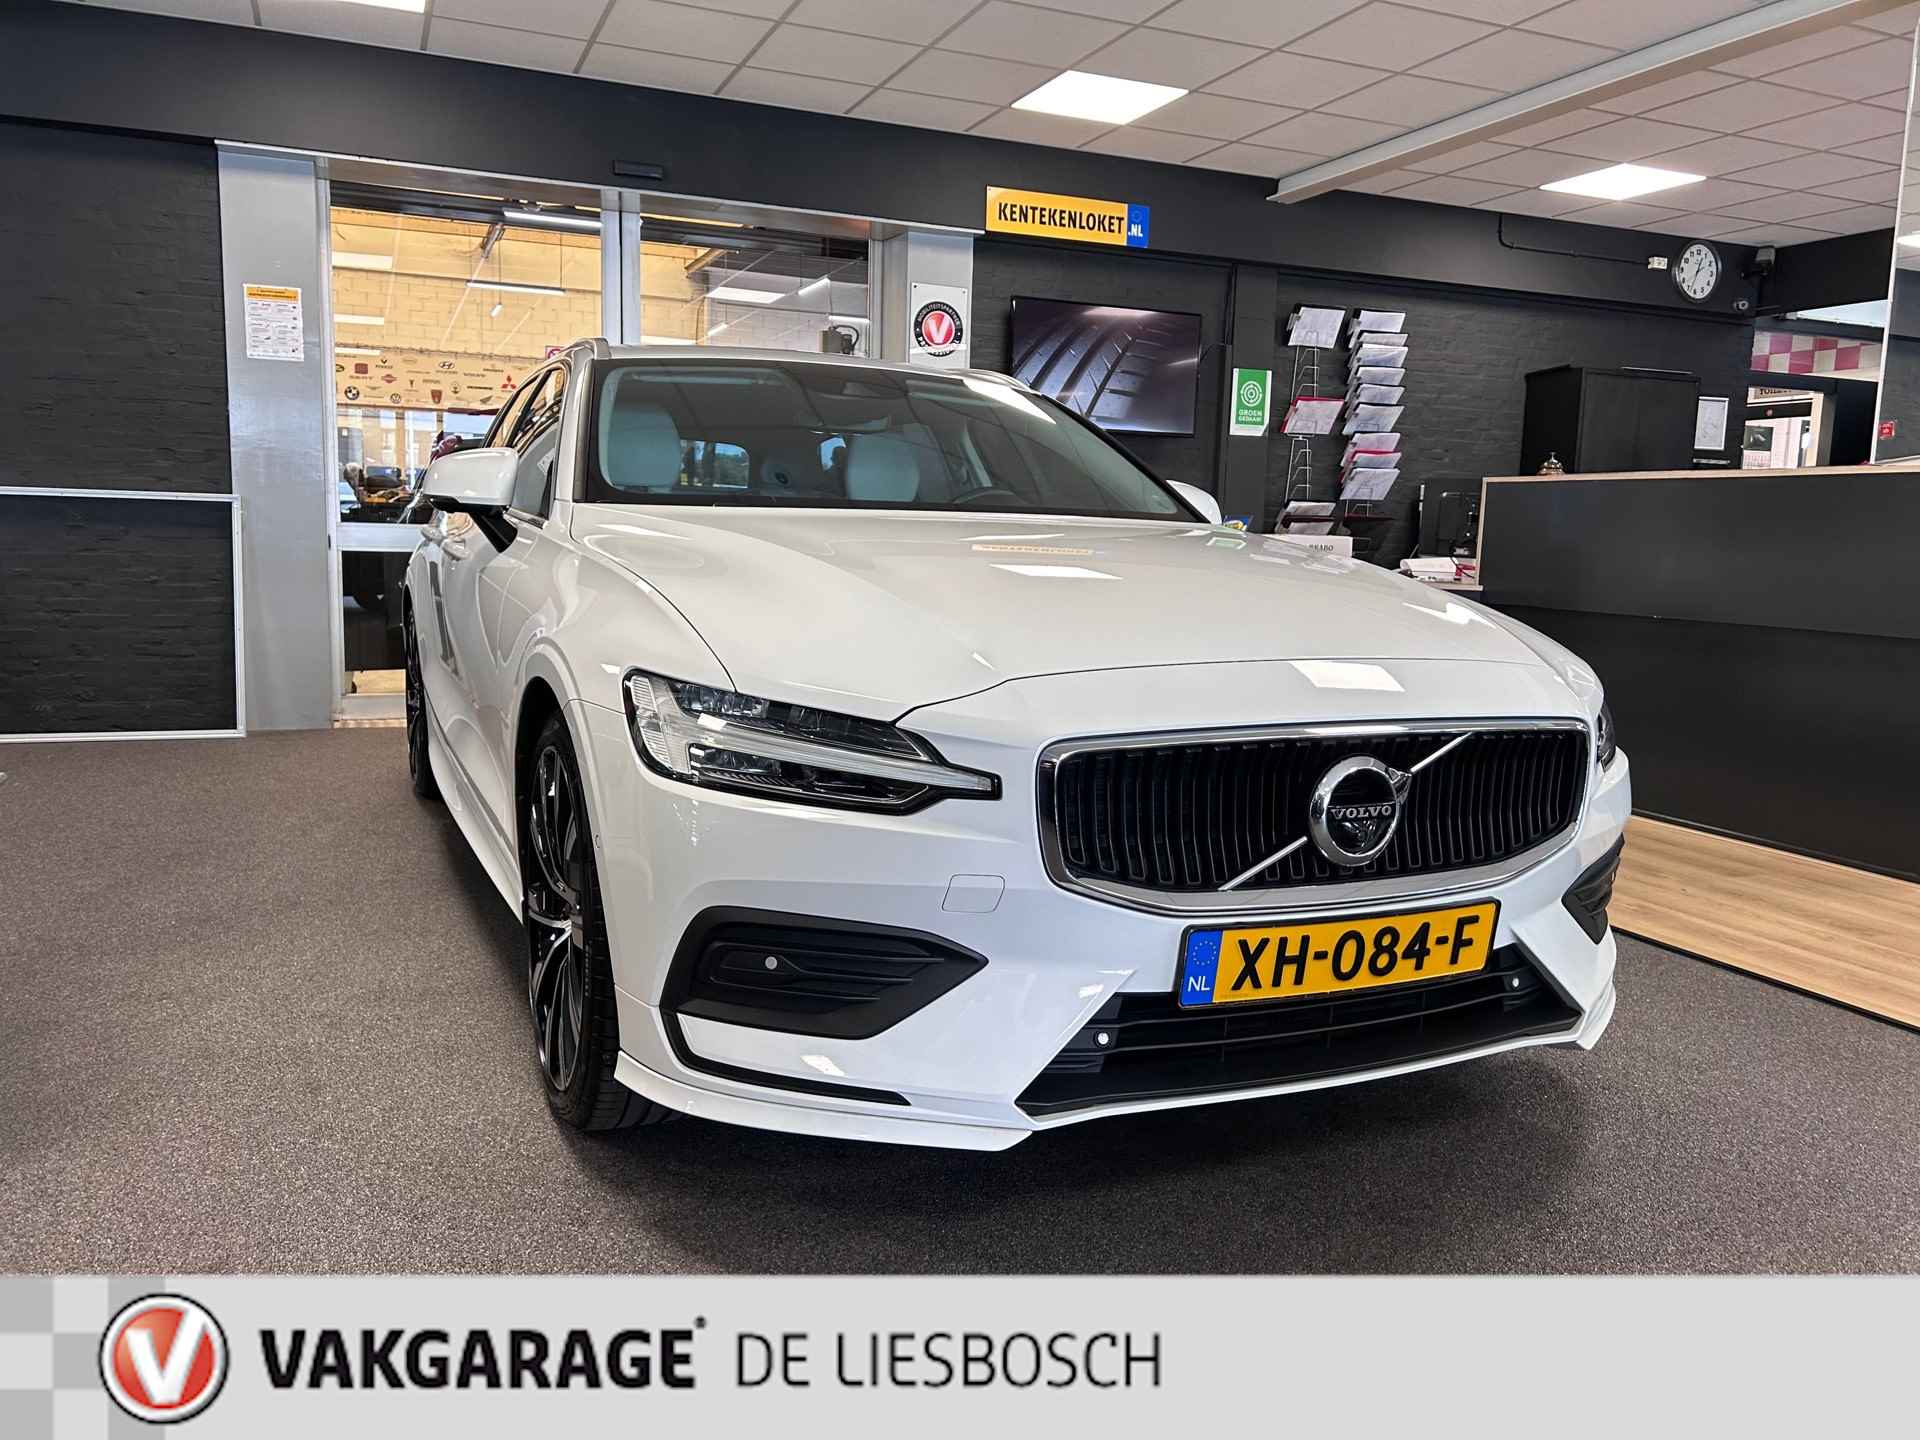 Volvo V60 2.0 T5 Momentum/Styling kit/Automaat/Led/20inch/360 camera - 9/34